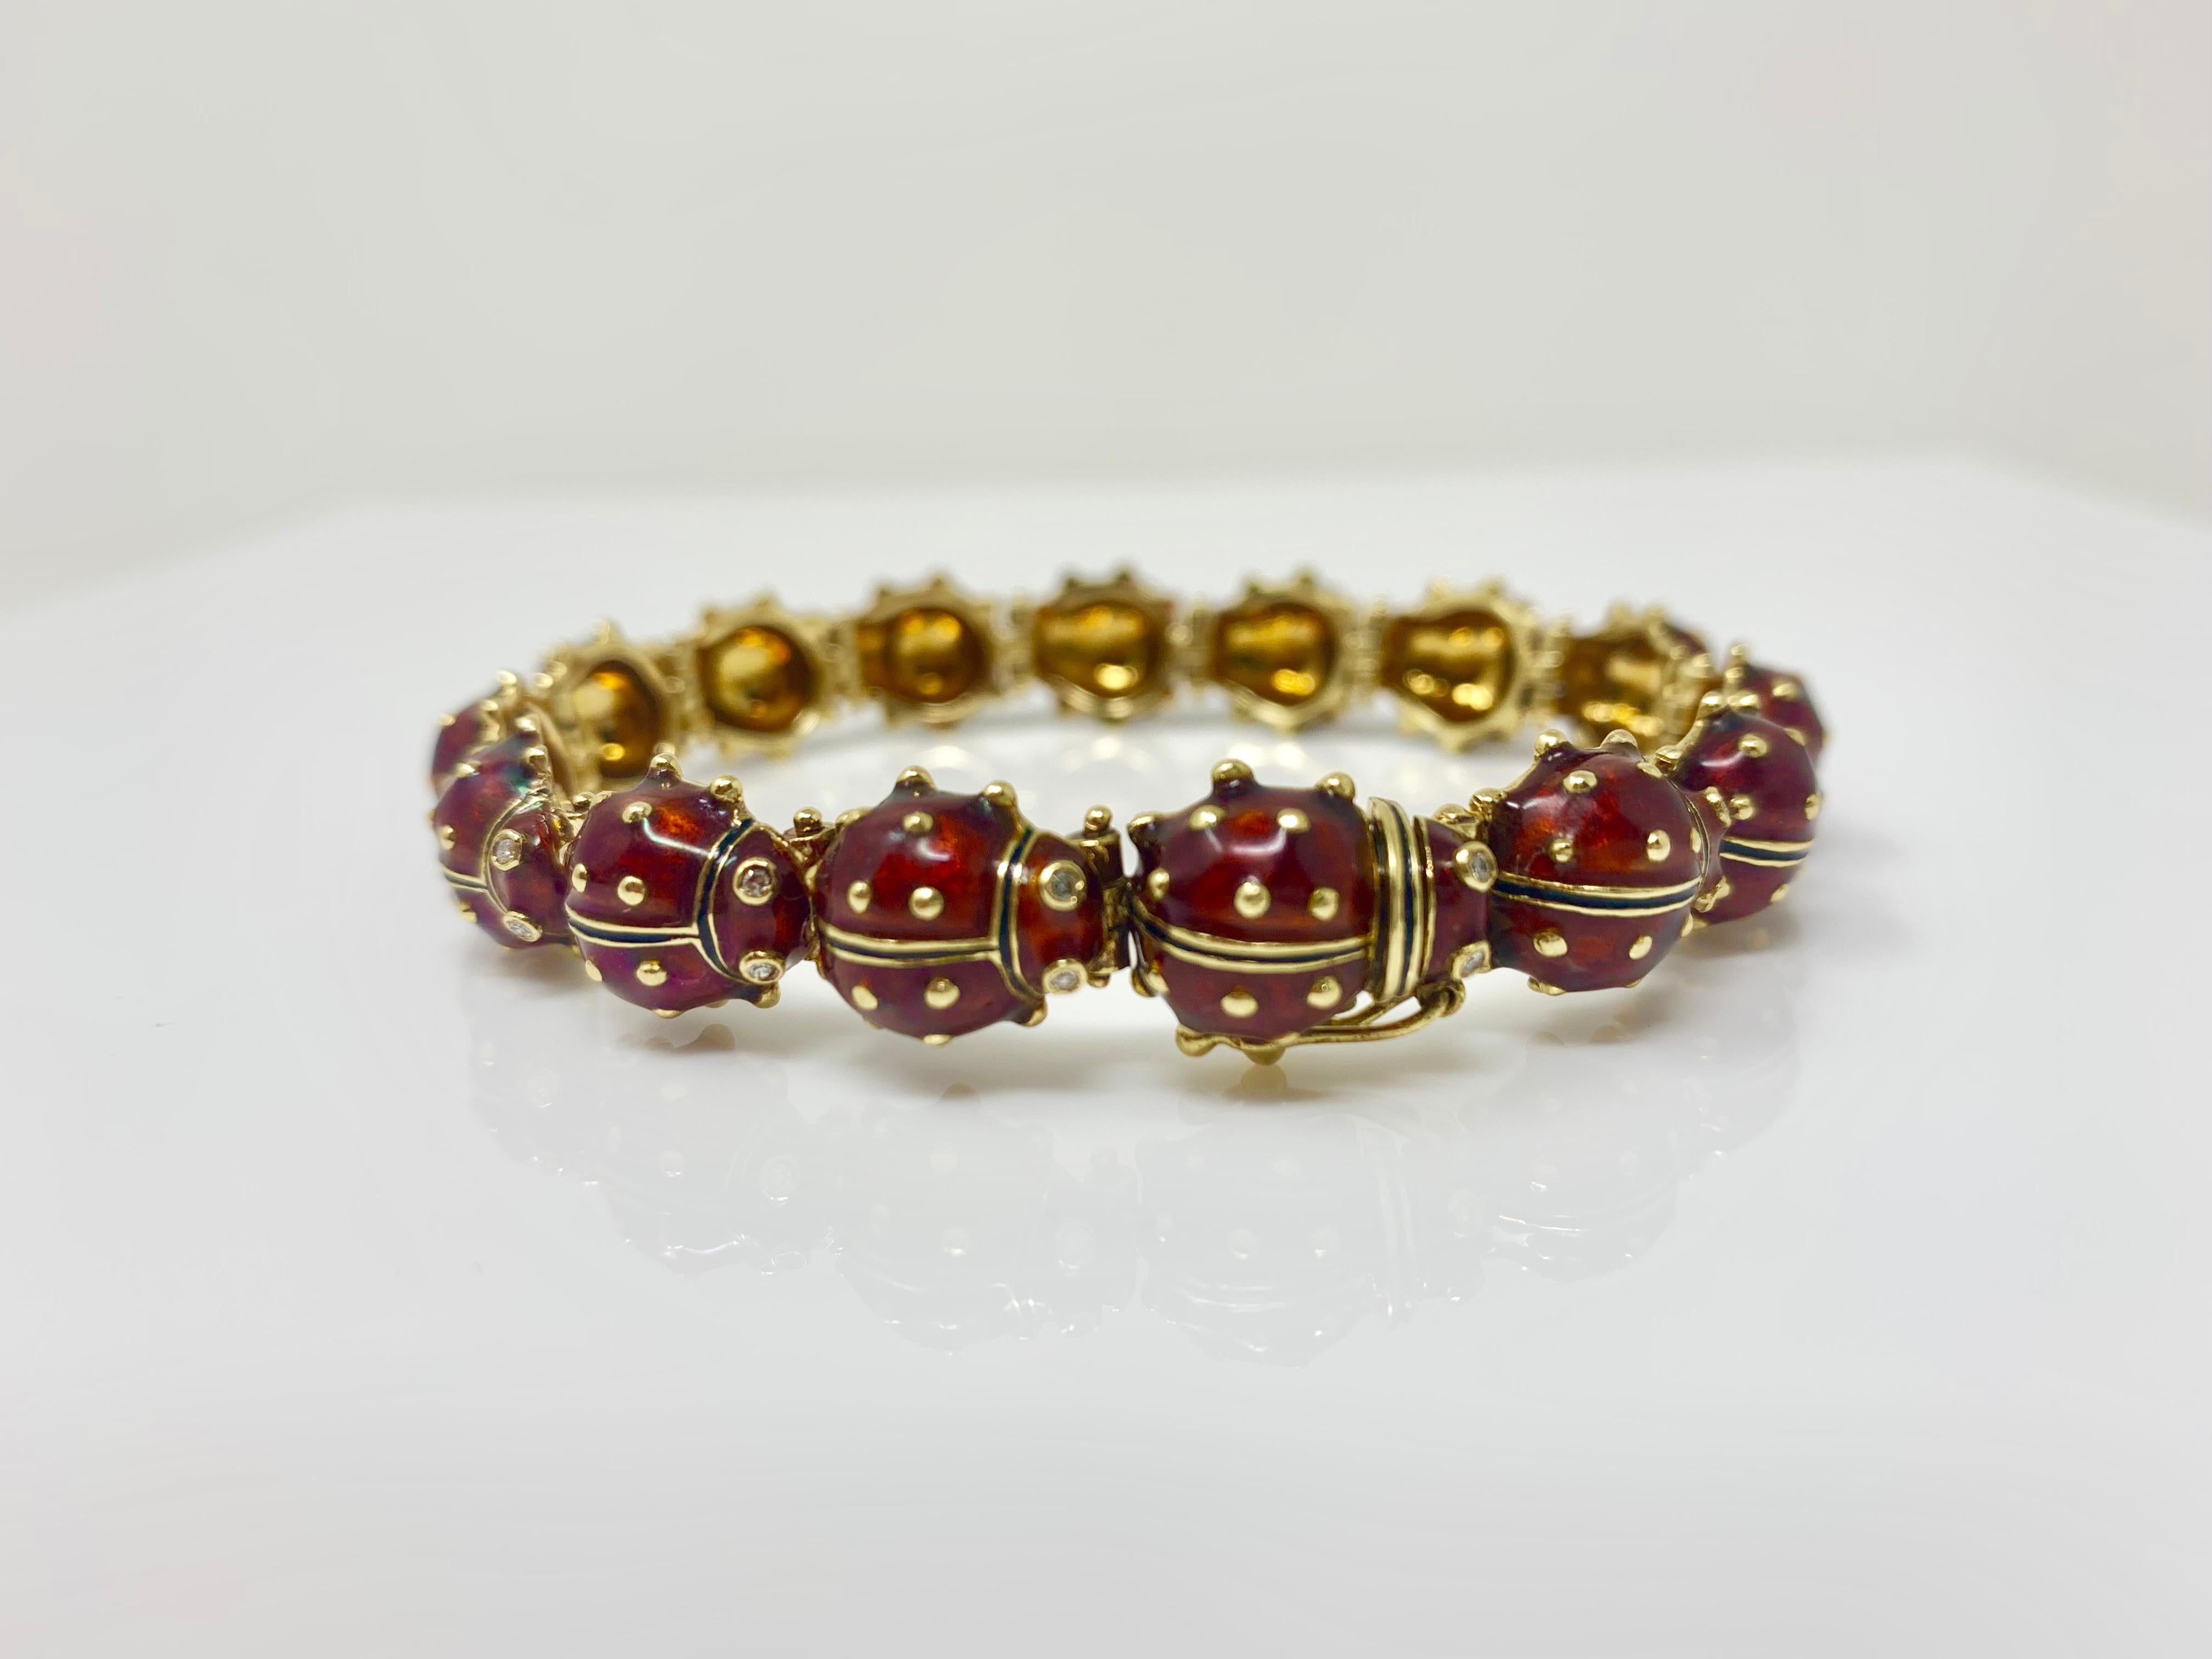 This exclusive Lady bug diamond, enamel and yellow gold bracelet is unique and beautifully handcrafted in 18k yellow gold. 
Diamond weight : 0.55 carat 
Metal : 18K yellow gold 
Measurement : 7 1/2 inches